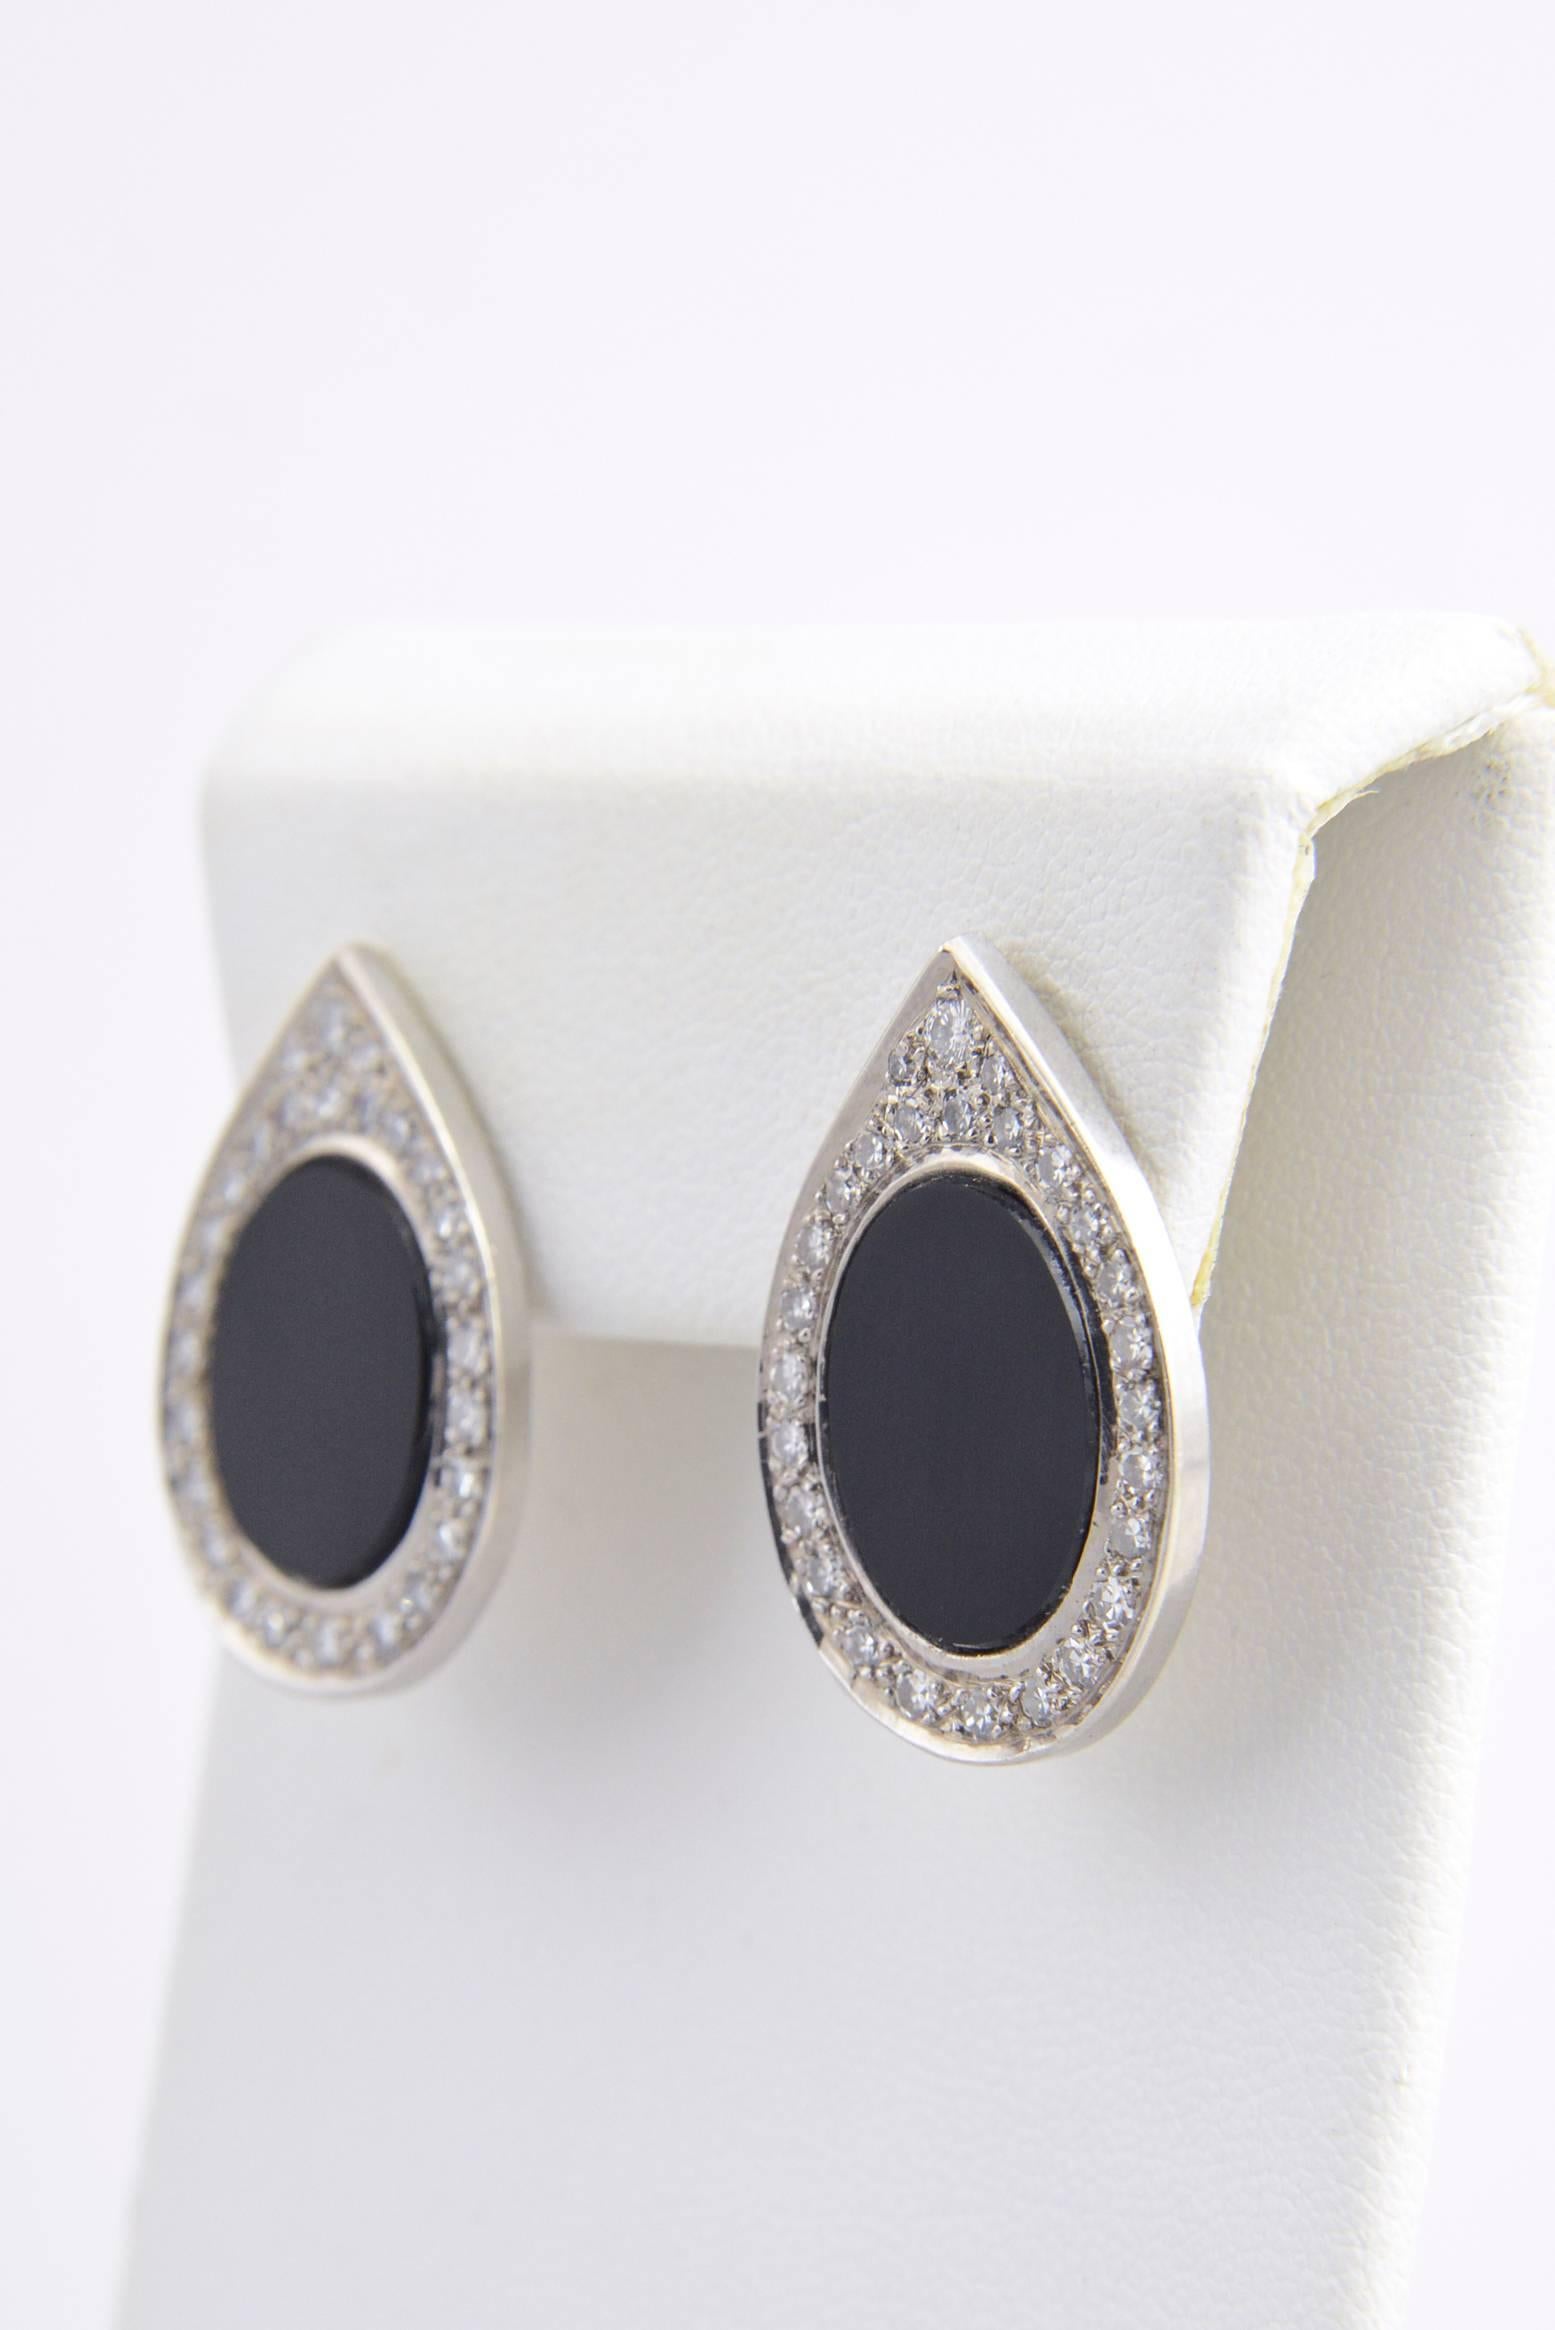 Elegant earrings featuring an oval onyx set in a platinum and diamond frame pear shaped teardrop frame. Diamonds count is approximately 1.75ct.  These earrings have a post back.